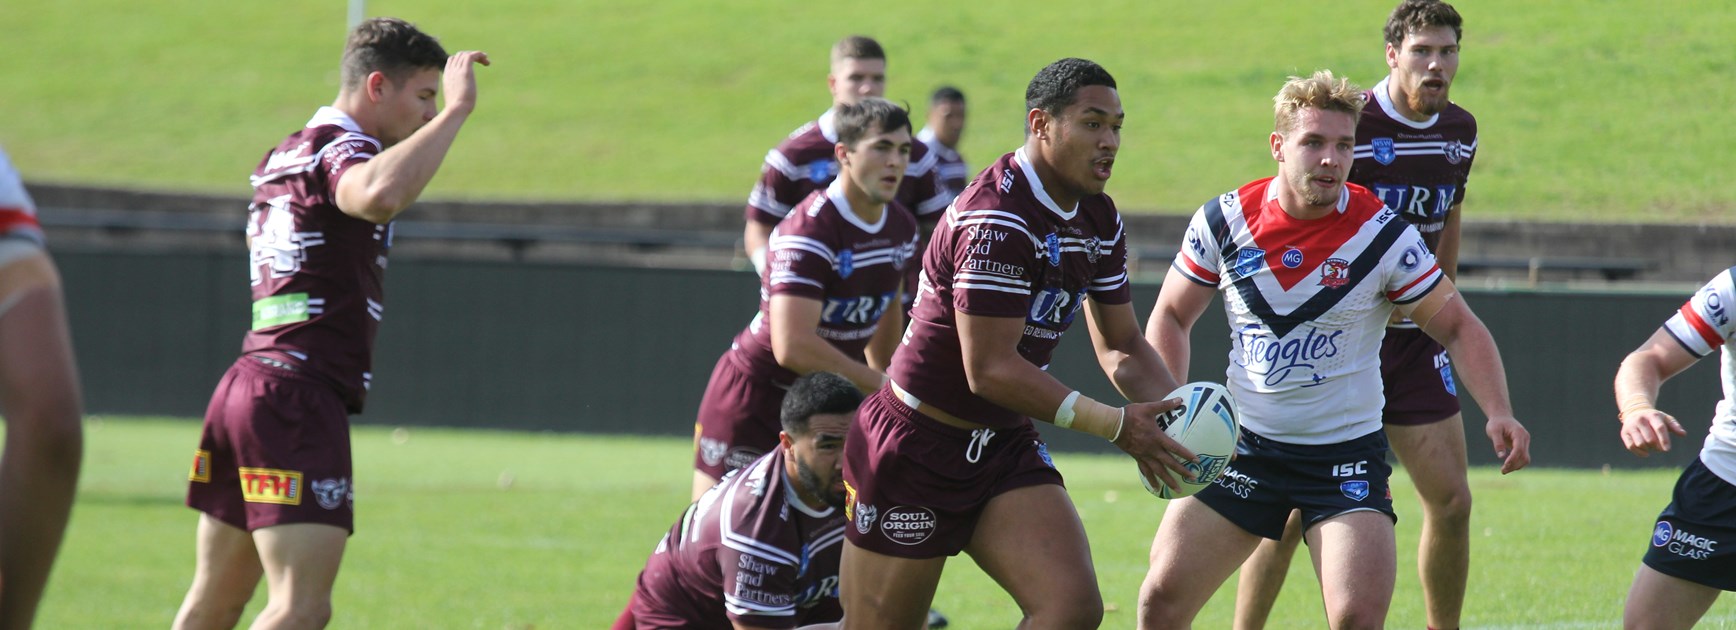 Sea Eagles lose to Roosters in Jersey Flegg